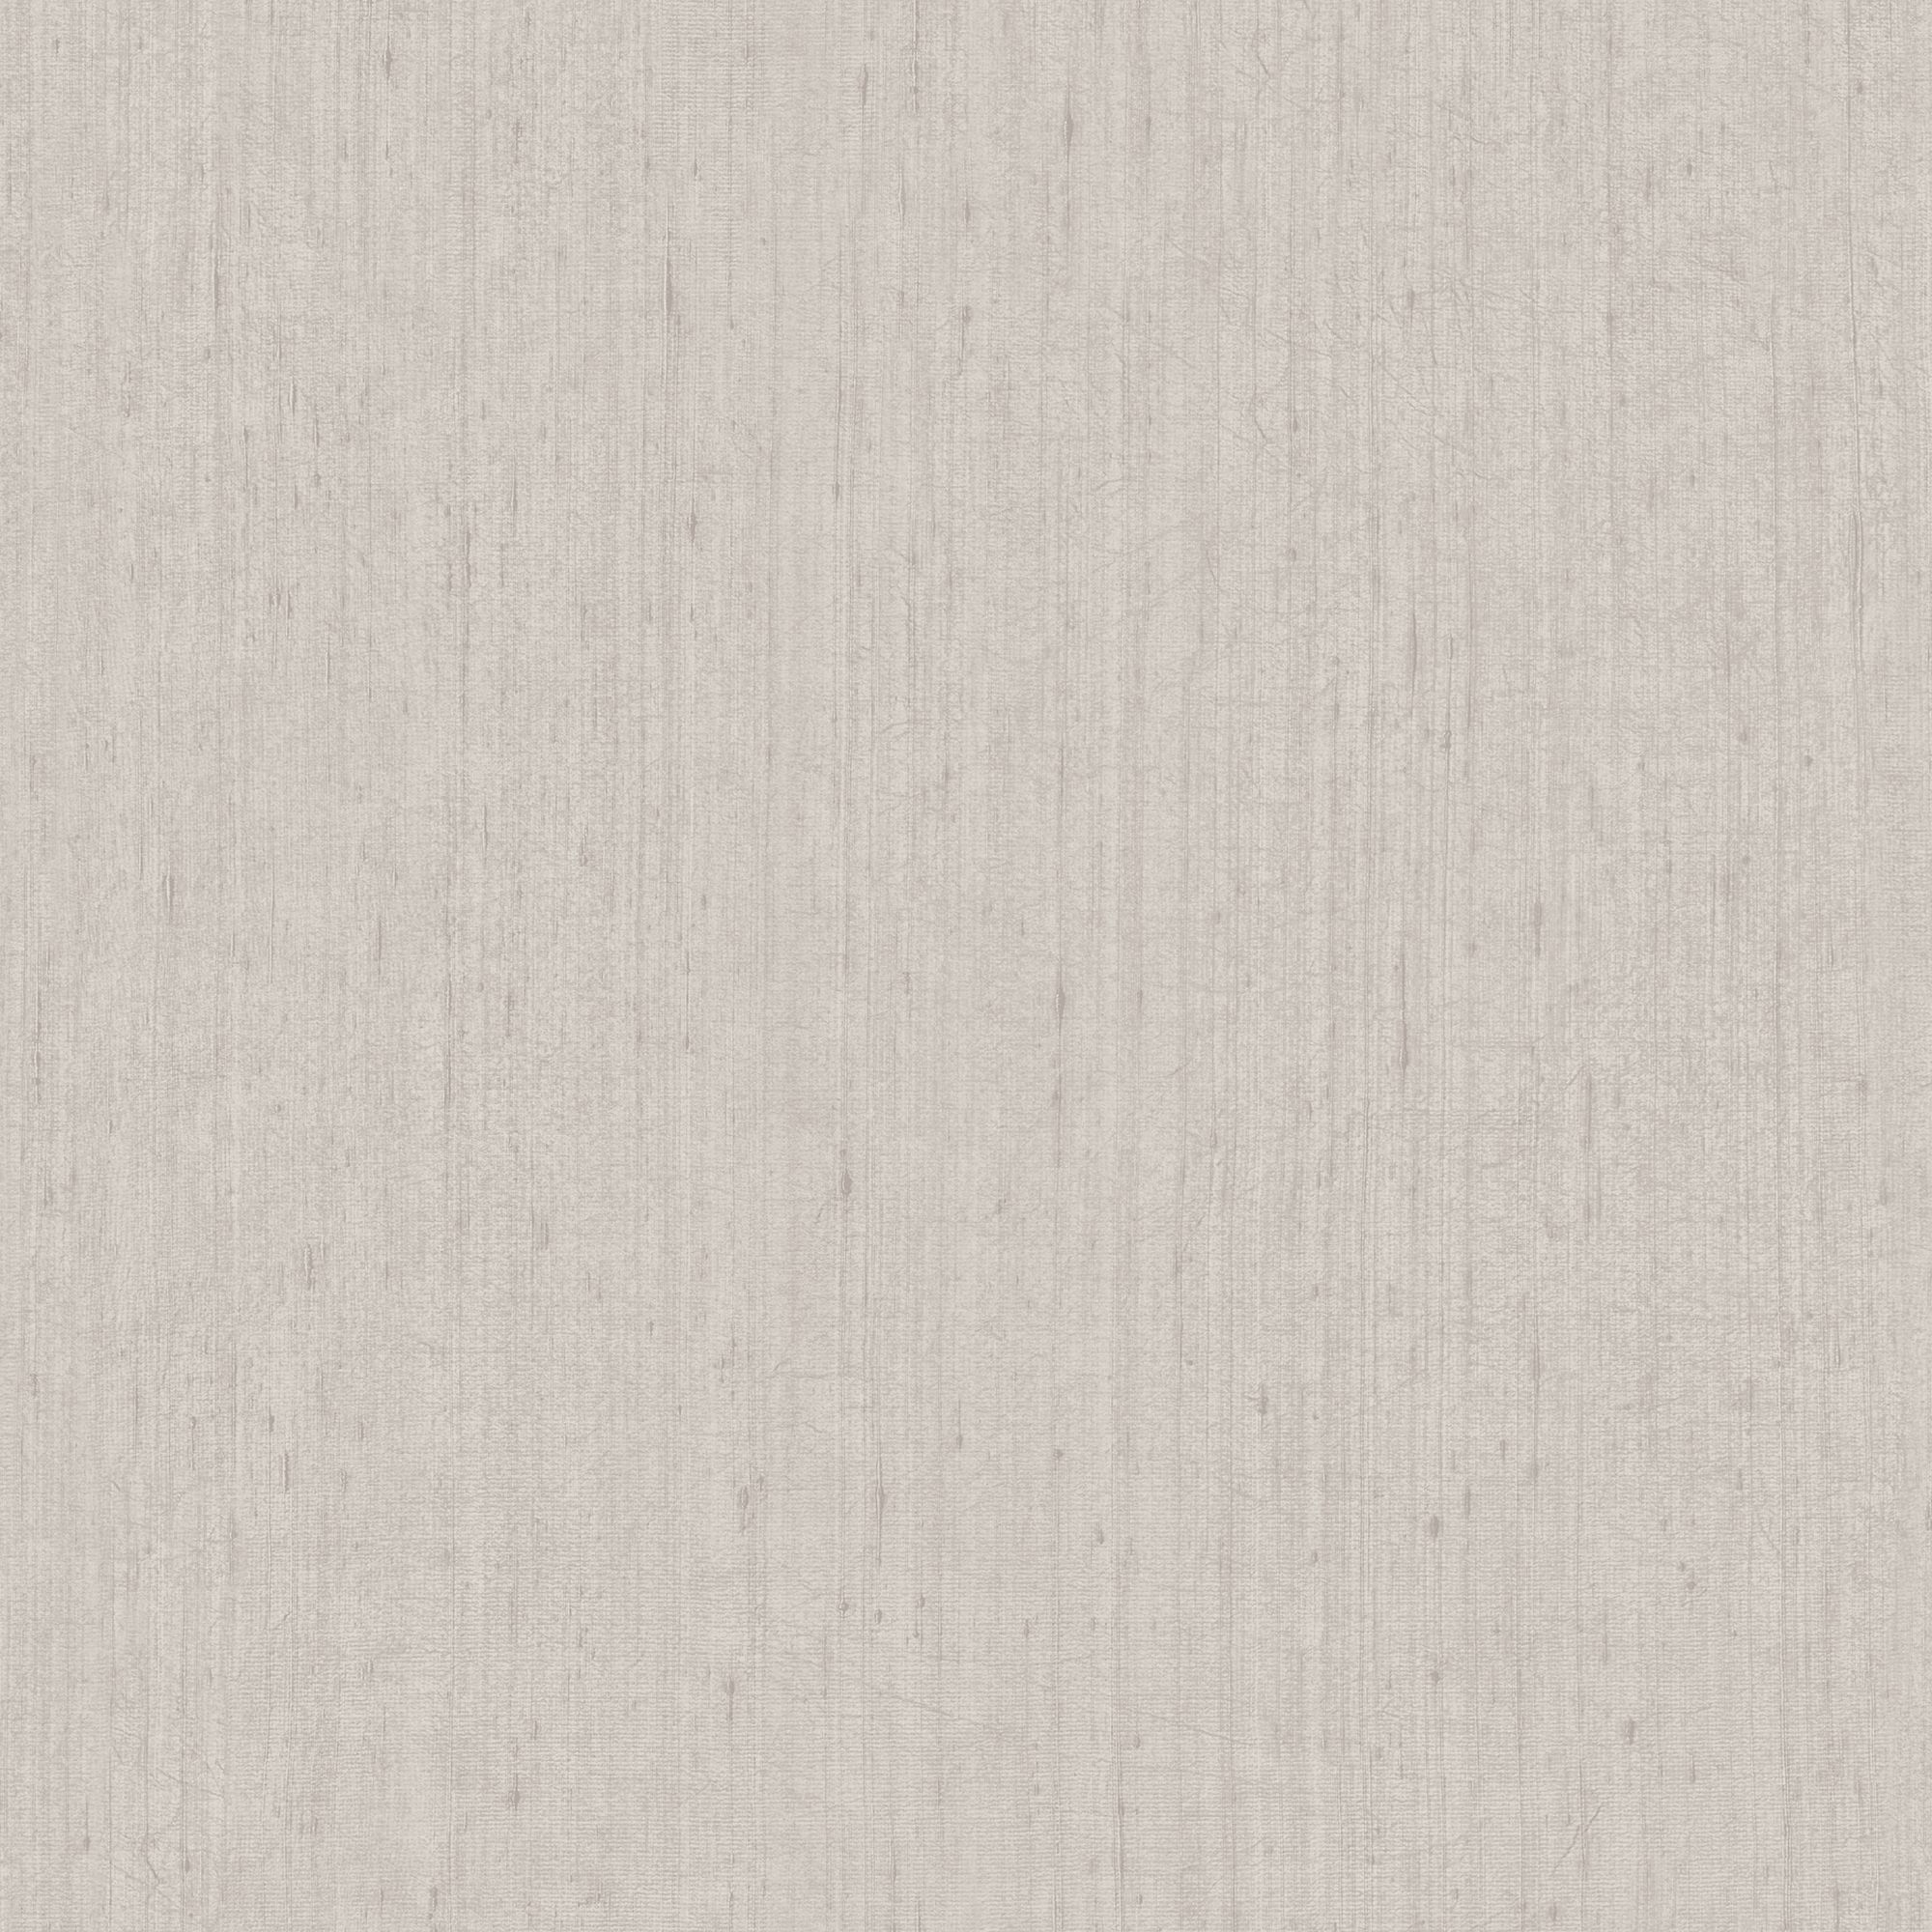 Clarissa Hulse Tisbury Mother of Pearl effect Smooth Wallpaper